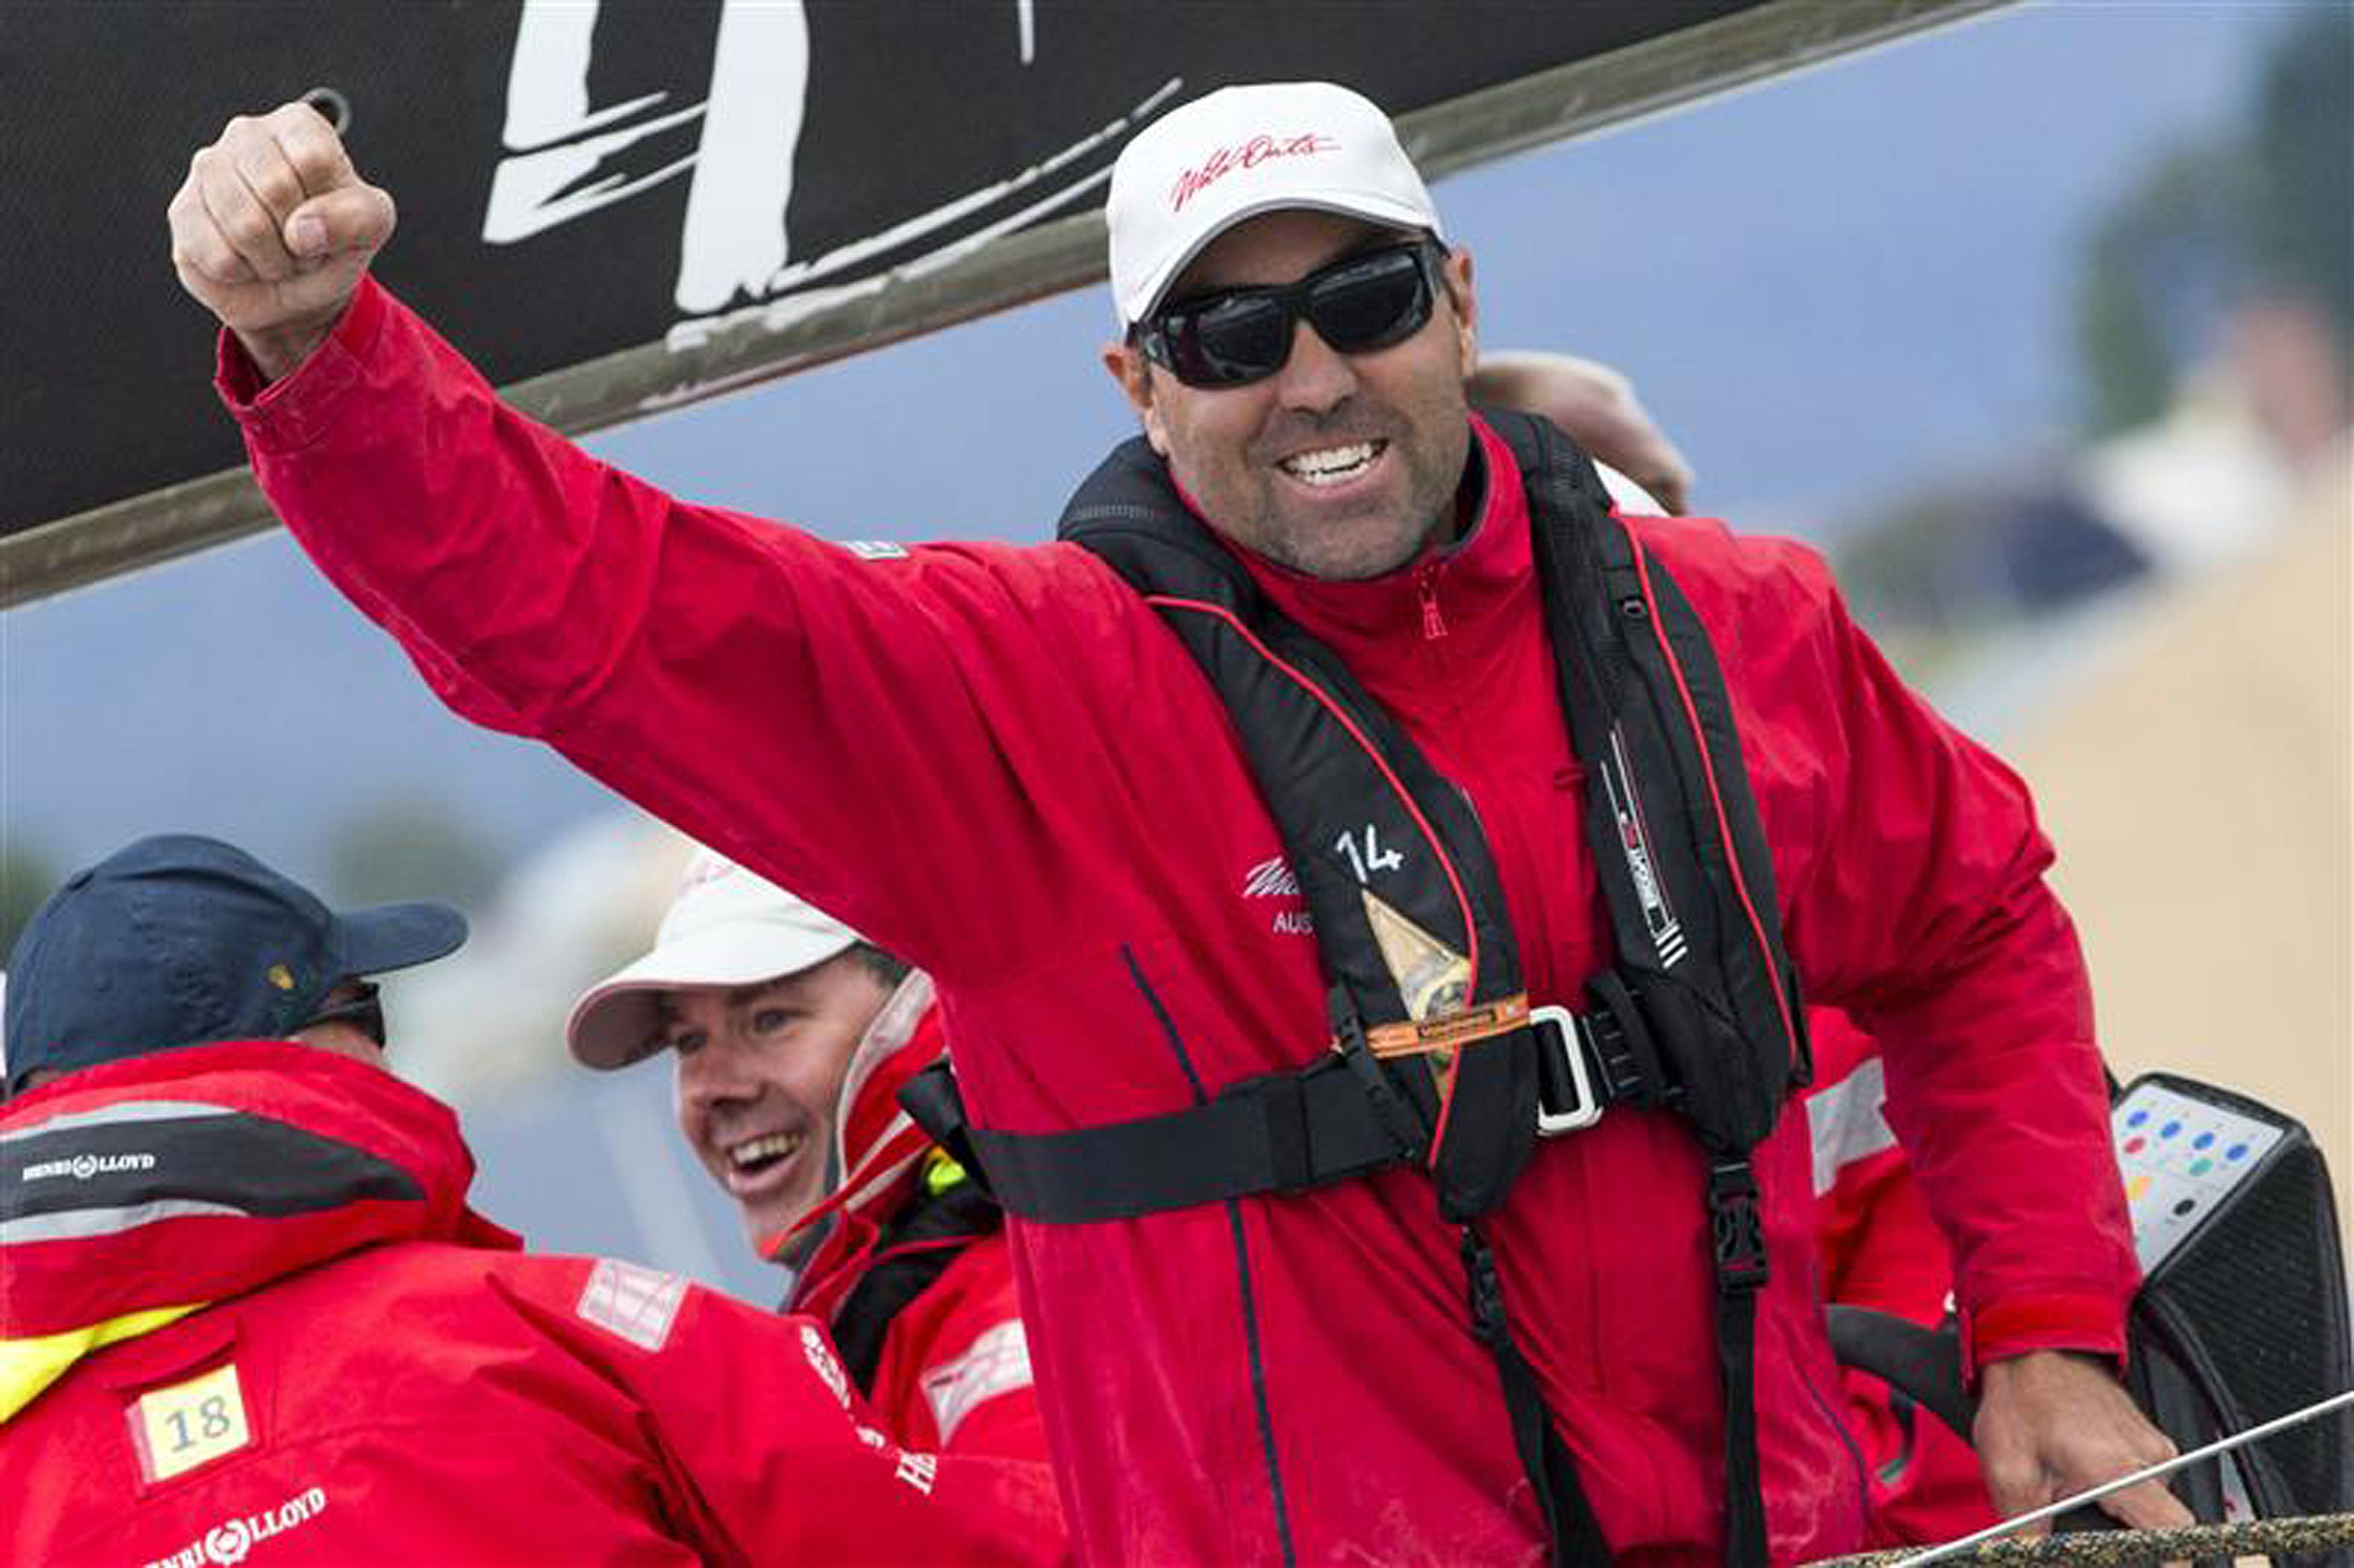 Wild oats X1 skipper Mark Richard celebrates after being the first to reach the finish line in the Sydney to Hobart race. Photo: AFP